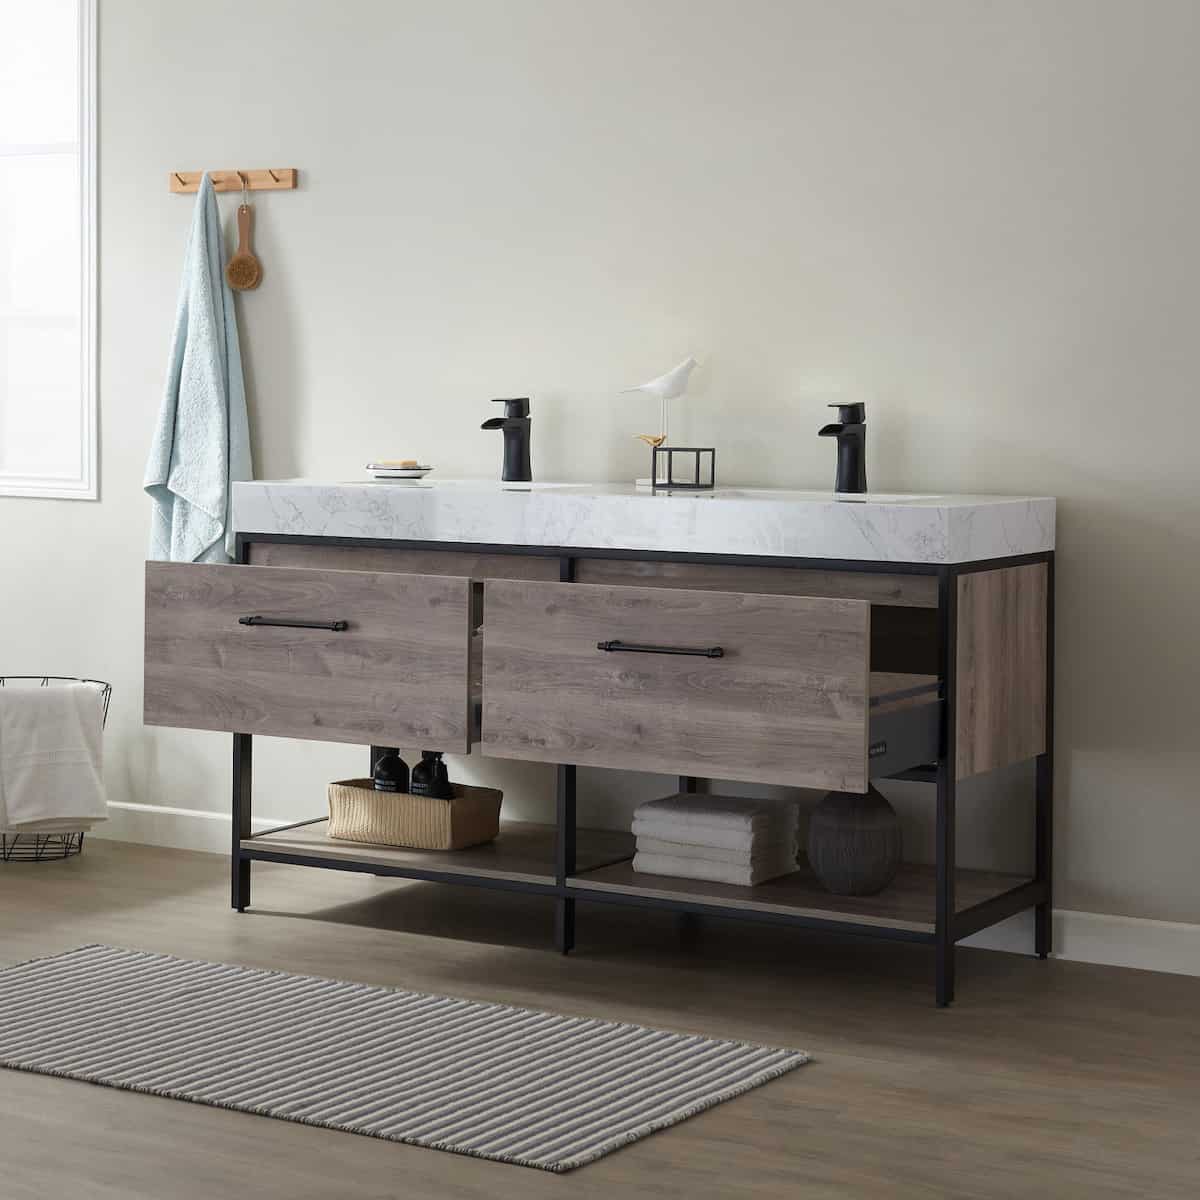 Vinnova Palma 60 Inch Freestanding Double Vanity in Mexican Oak with White Composite Grain Stone Countertop Without Mirrors Drawers 701260-MXO-GW-NM